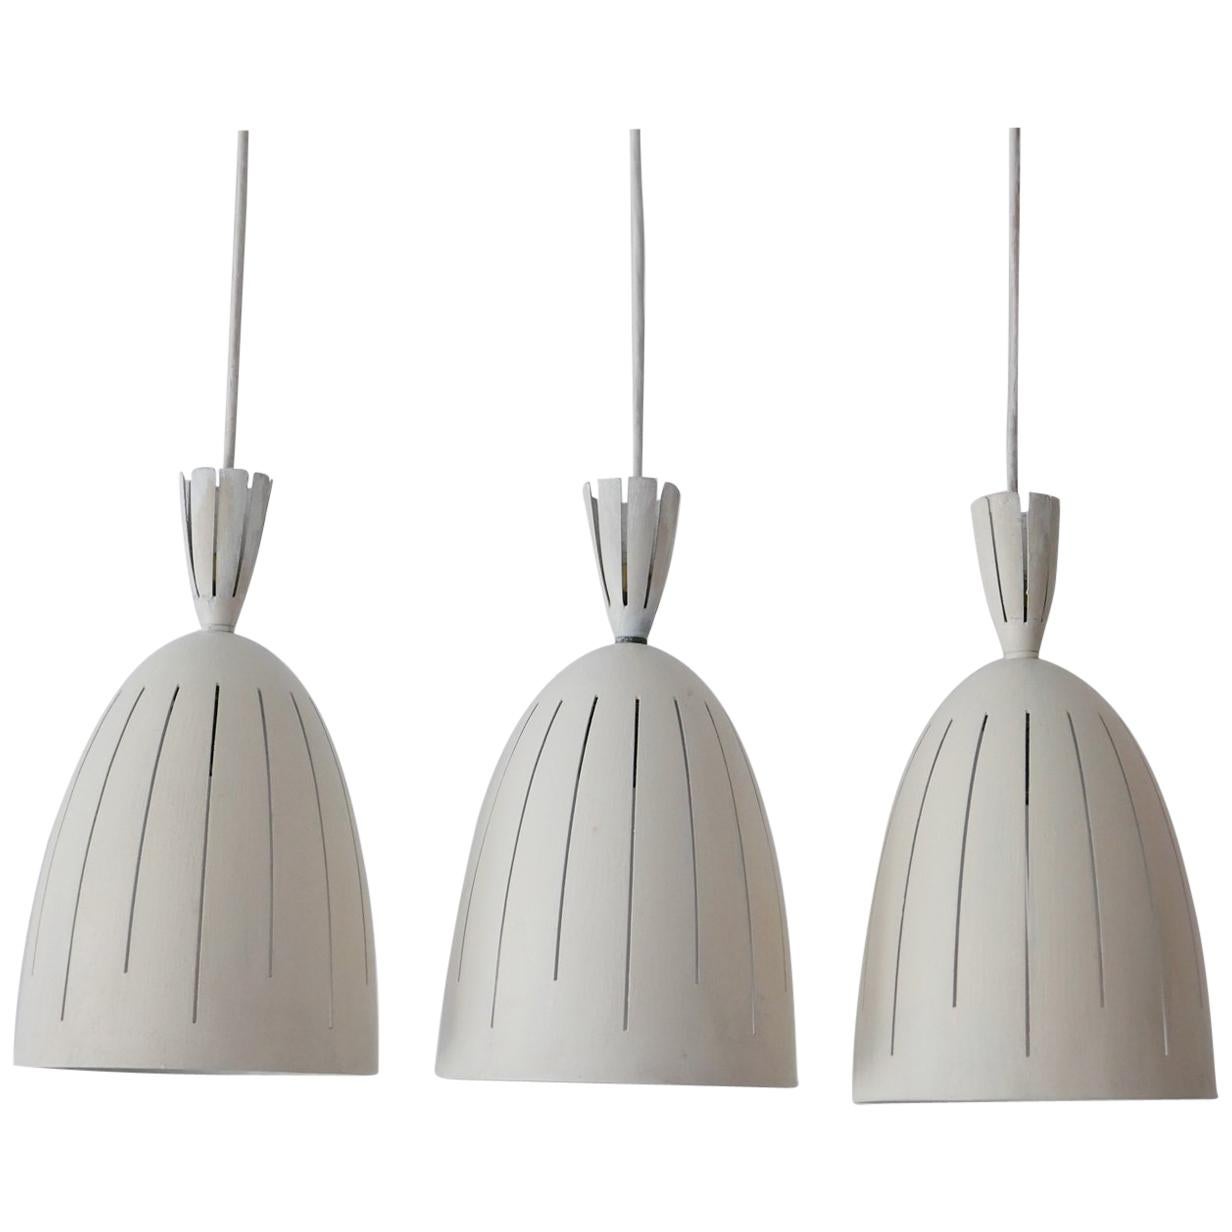 Set of Three Lovely Mid-Century Modern Diabolo Pendant Lamps, 1950s, Germany For Sale